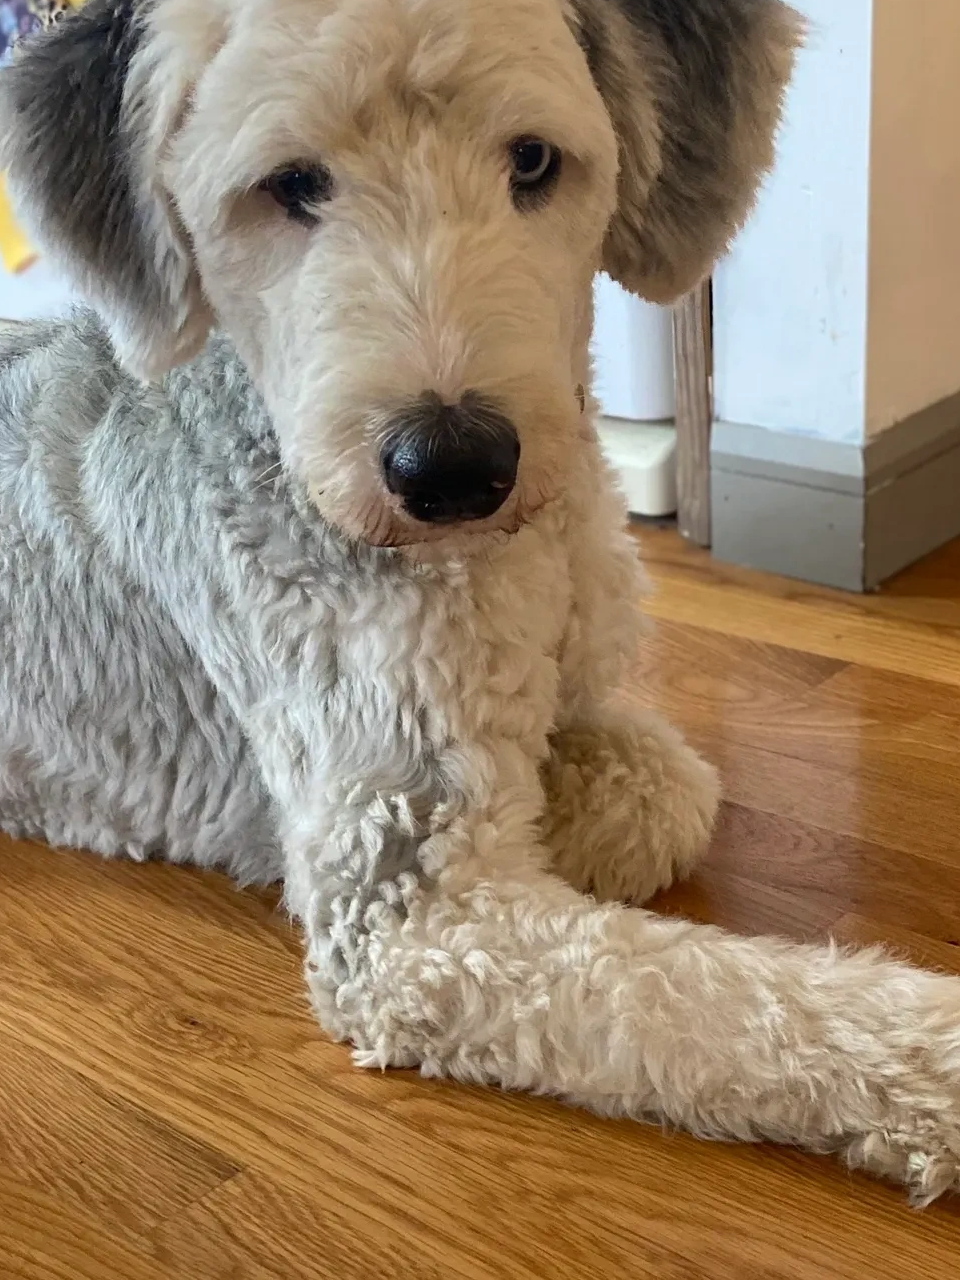 Our family pet Luna with her summer cut. She looks like a small great dane or doodle...but cuter!